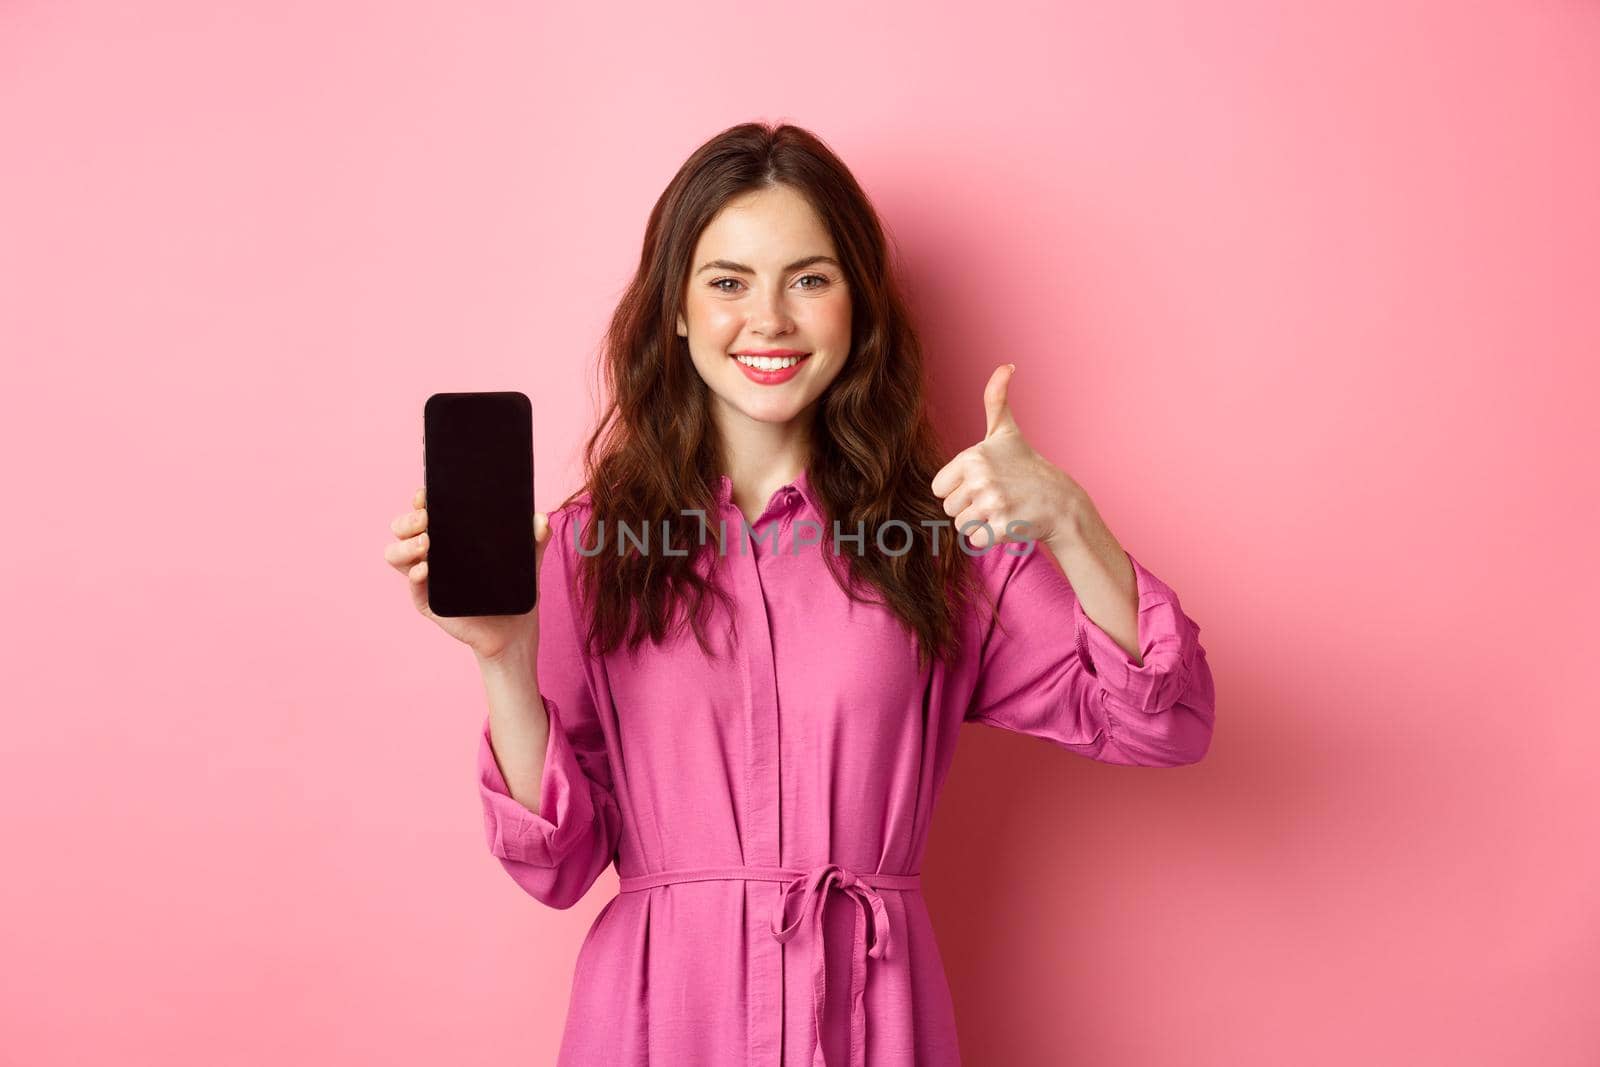 Technology concept. Young girl in dress, shows her smartphone screen and thumbs up, nod in approval, praise good app, standing over pink background.